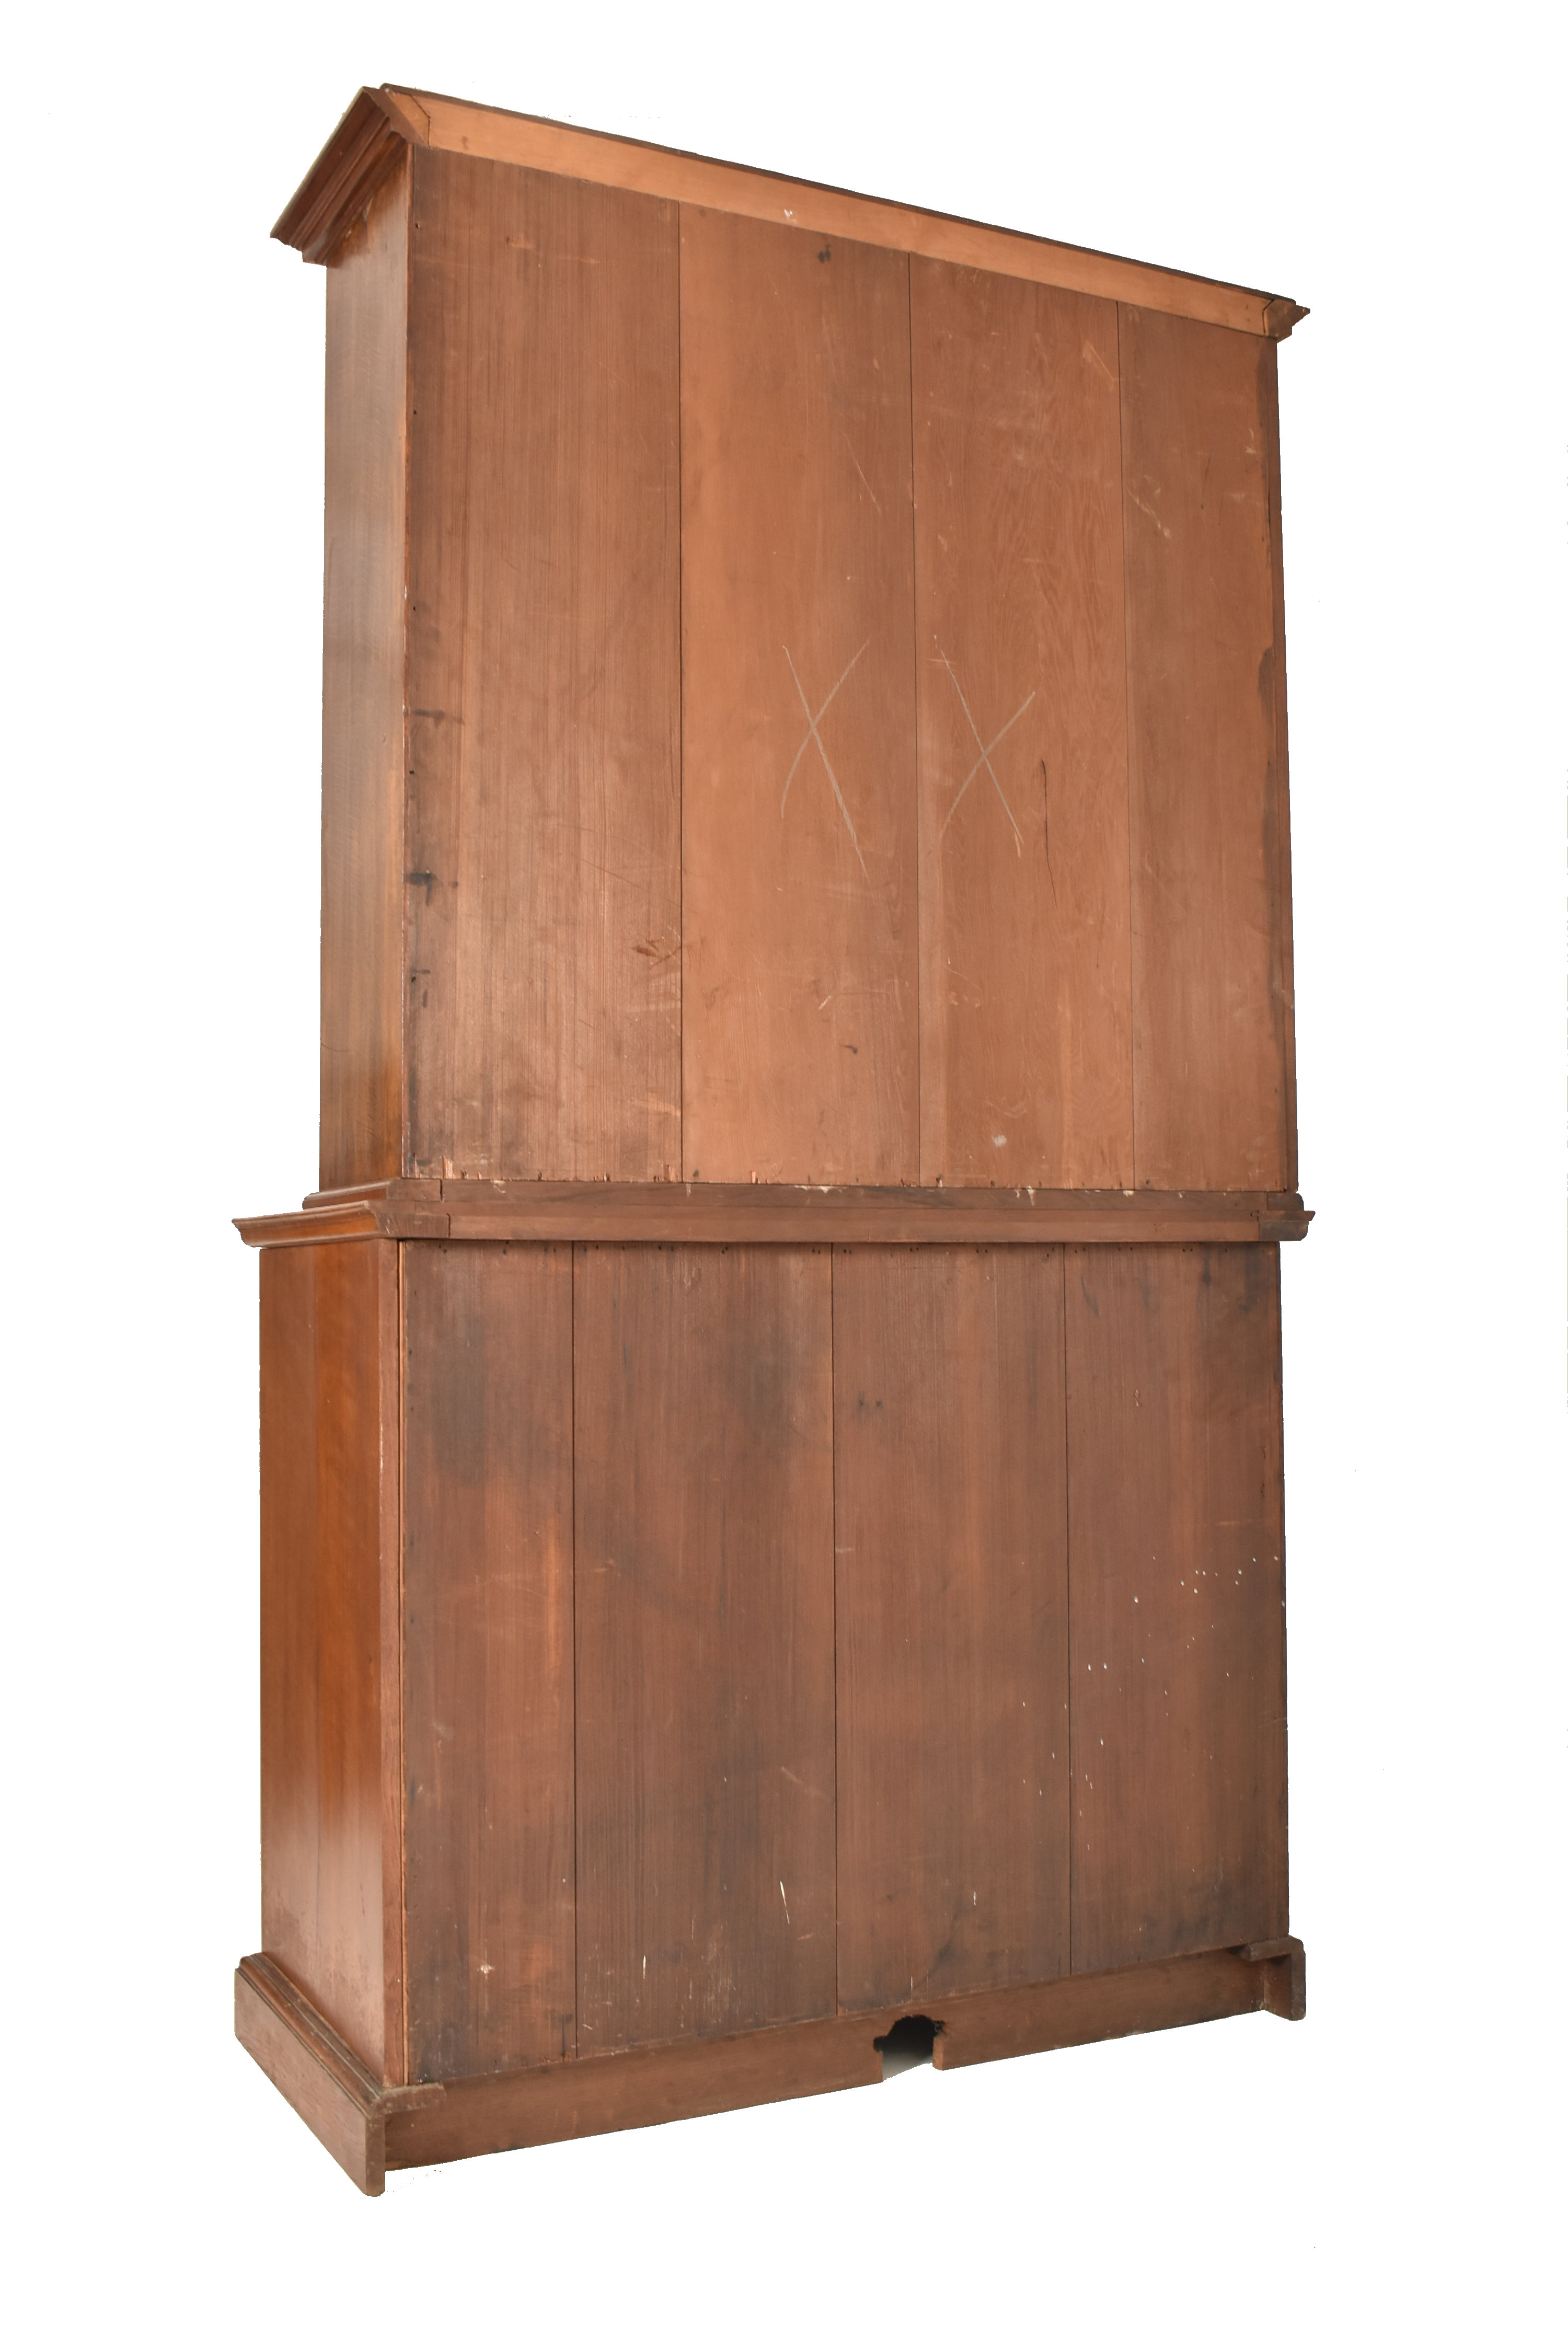 PAIR OF LATE 19TH CENTURY VICTORIAN OAK LIBRARY BOOKCASES - Image 7 of 12